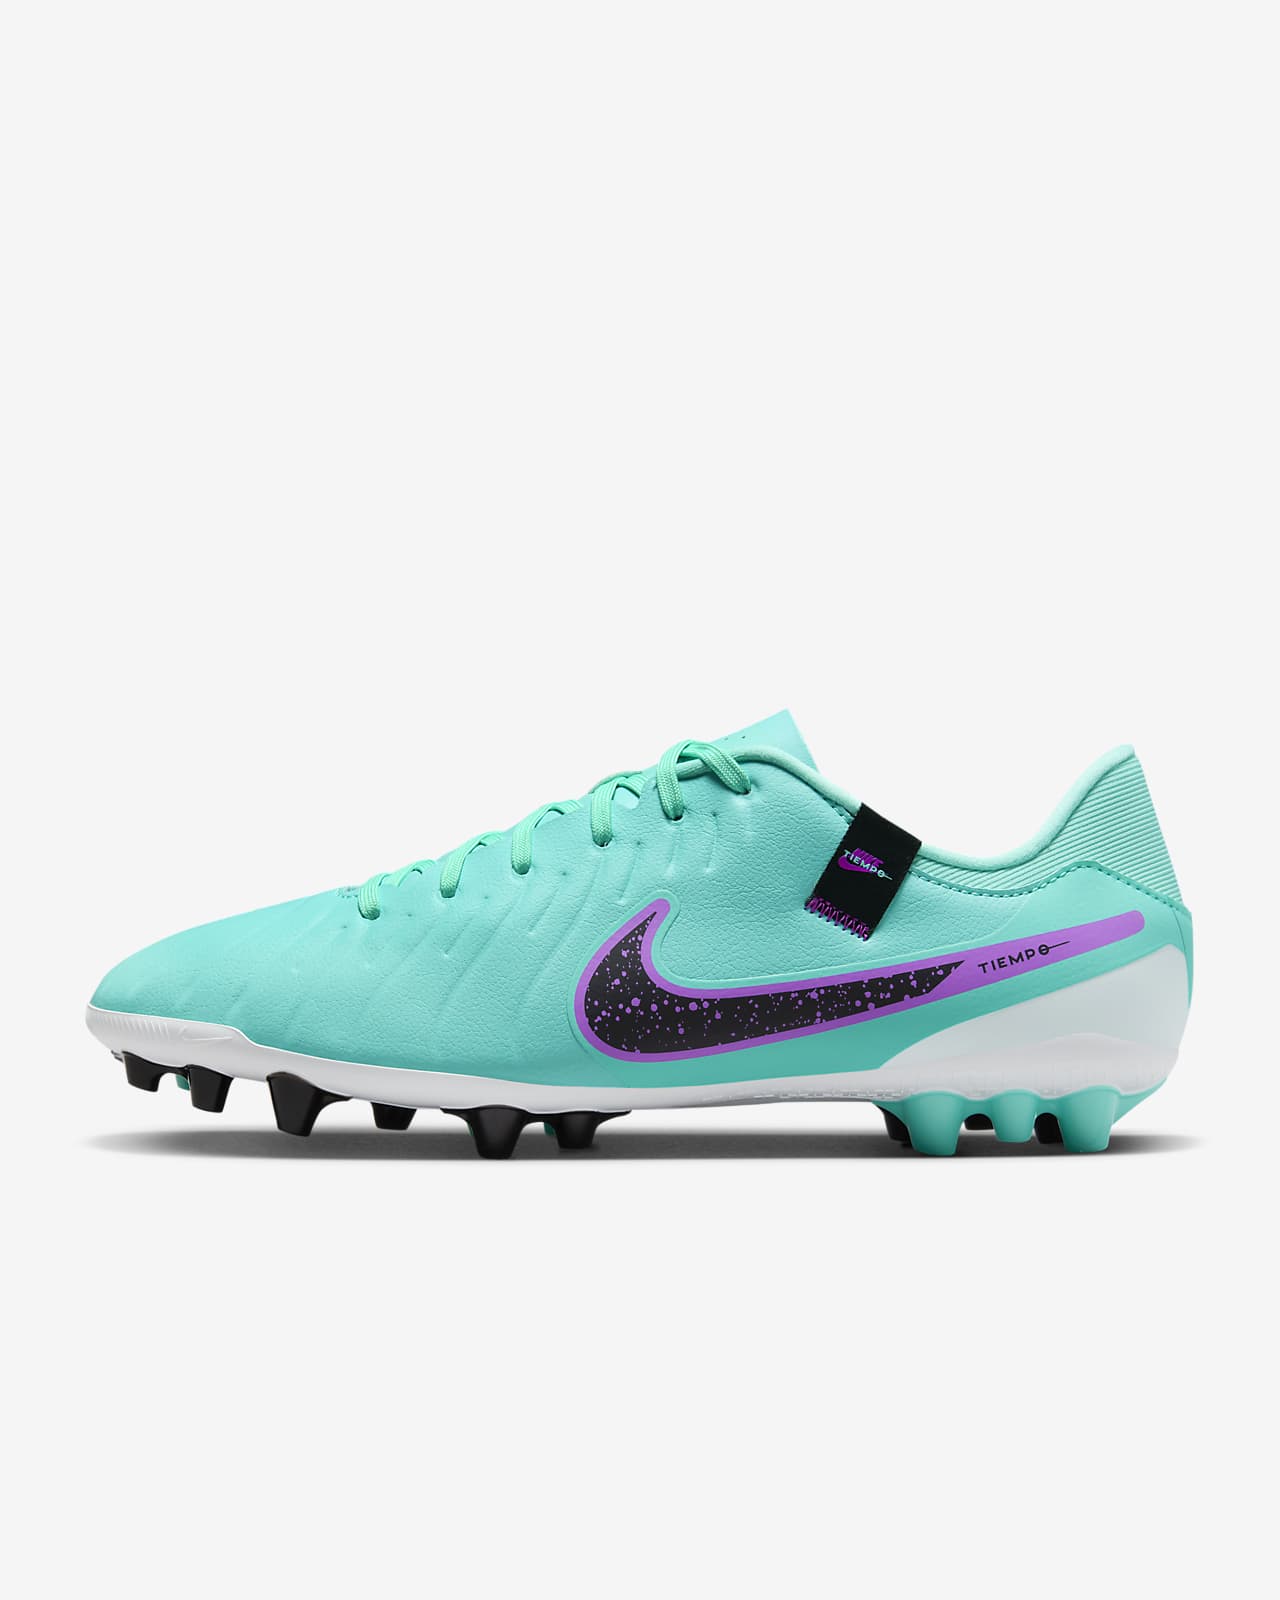 The Best Soccer Cleats, Balls, Goals, and More, According to The